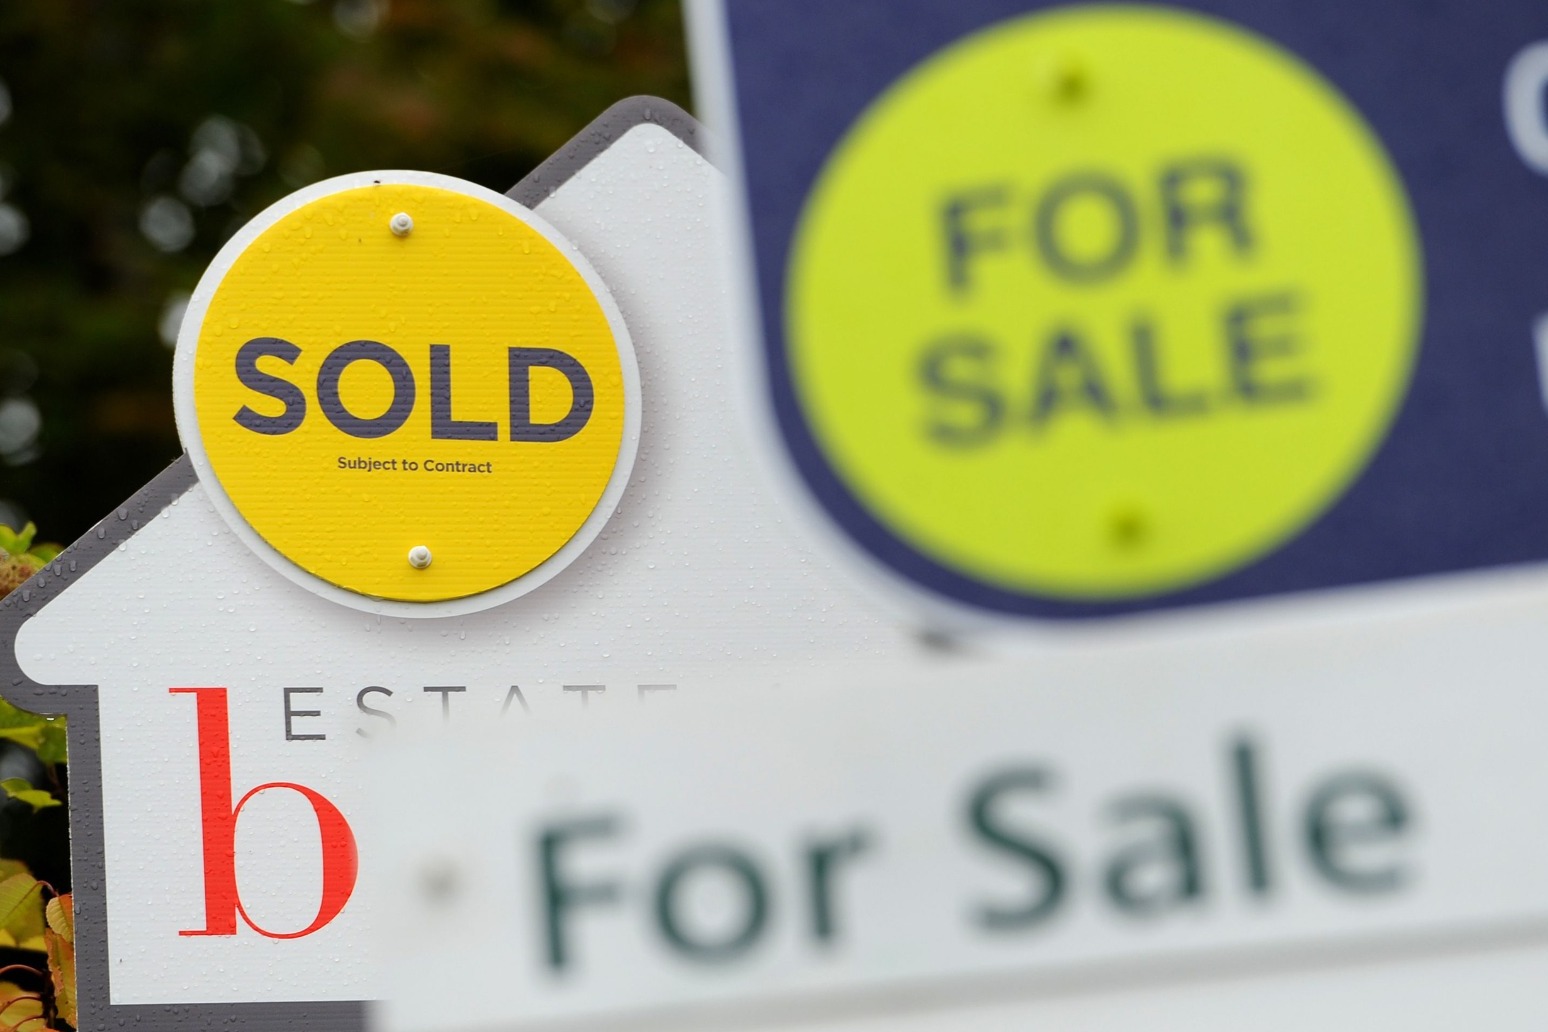 House prices rise in January 